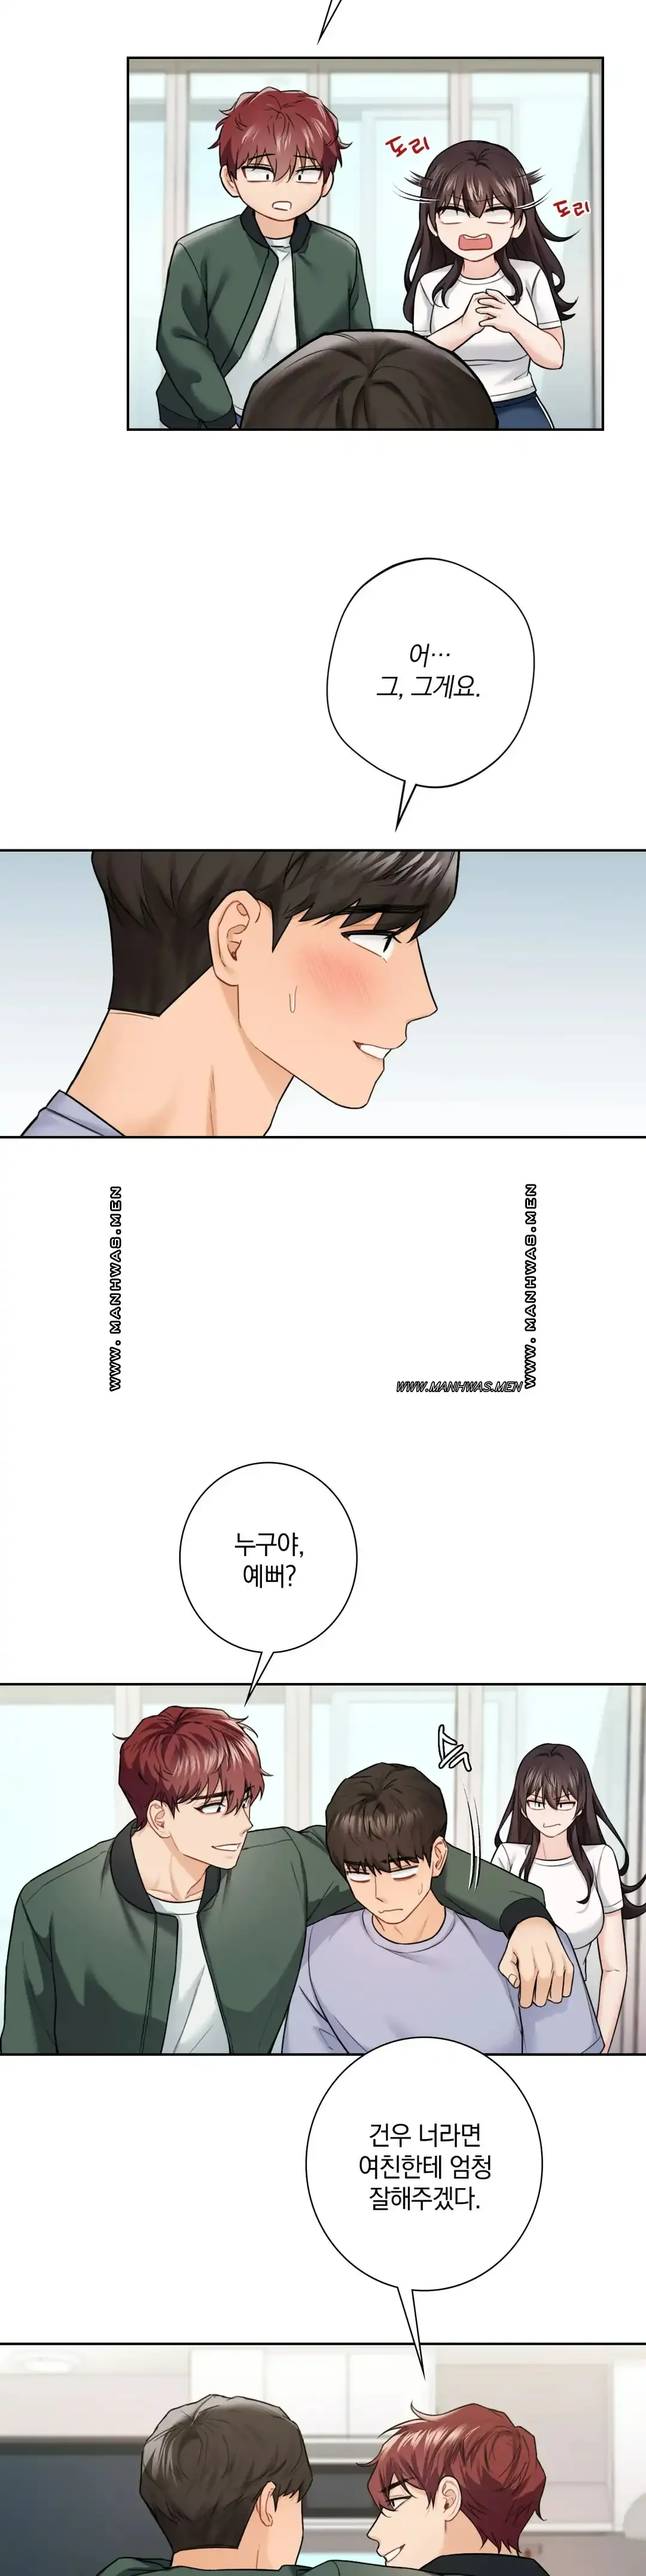 not-a-friend-what-do-i-call-her-as-raw-chap-39-22